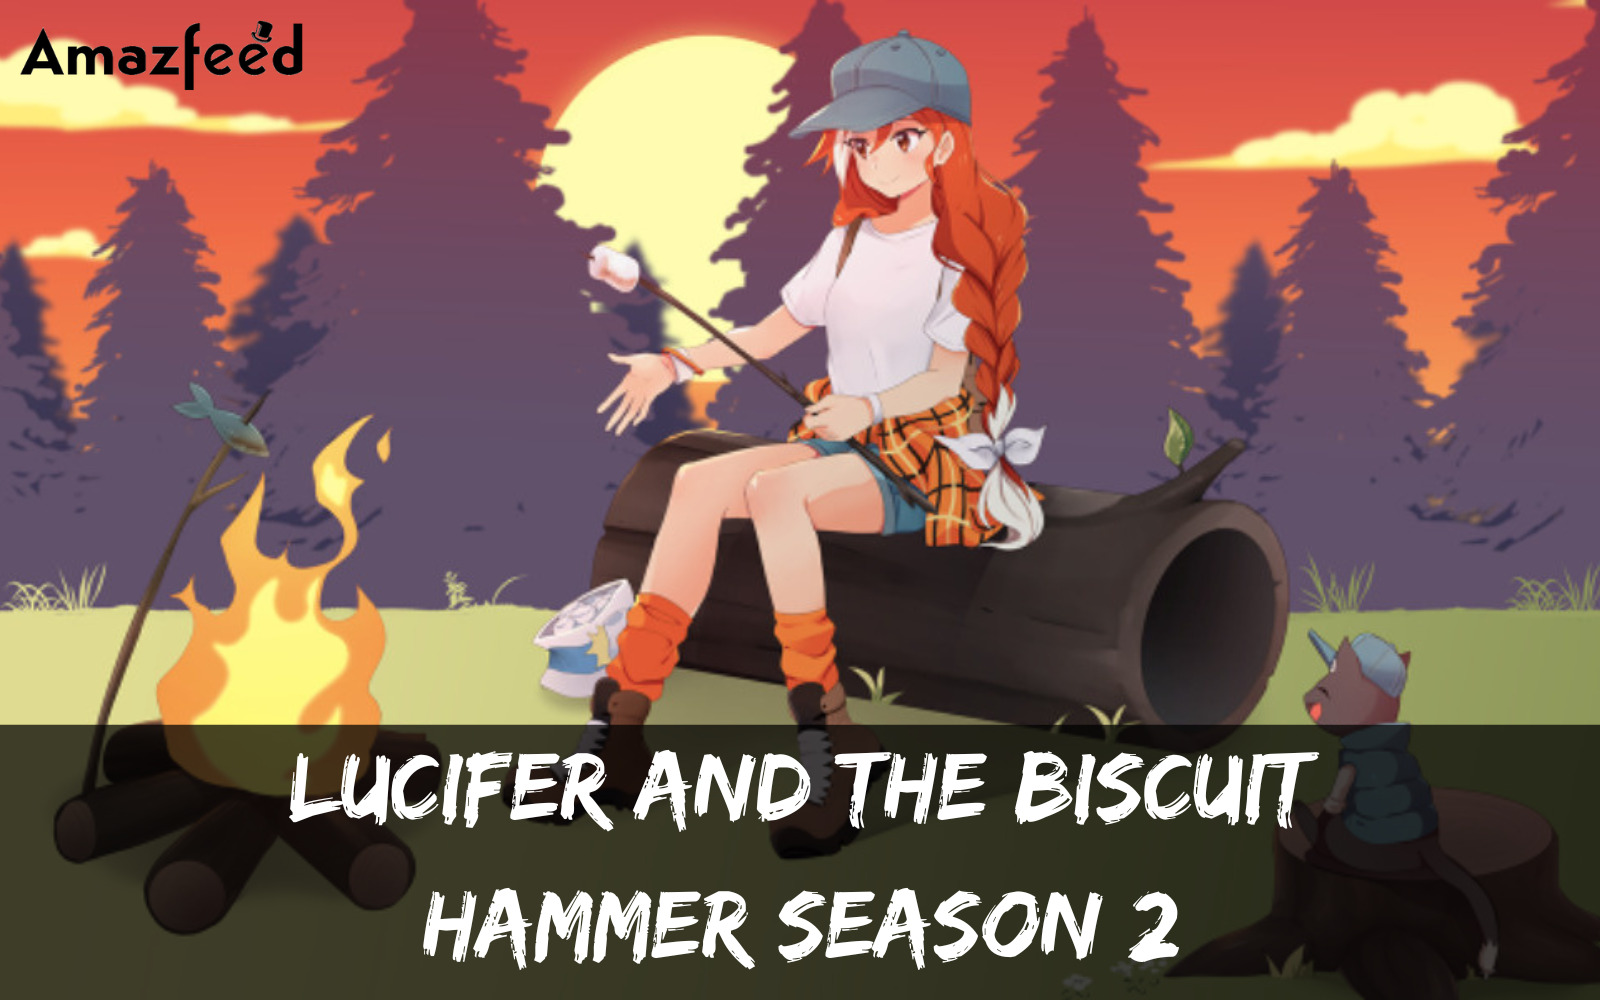 Lucifer and the Biscuit Hammer Season 2 spoiler